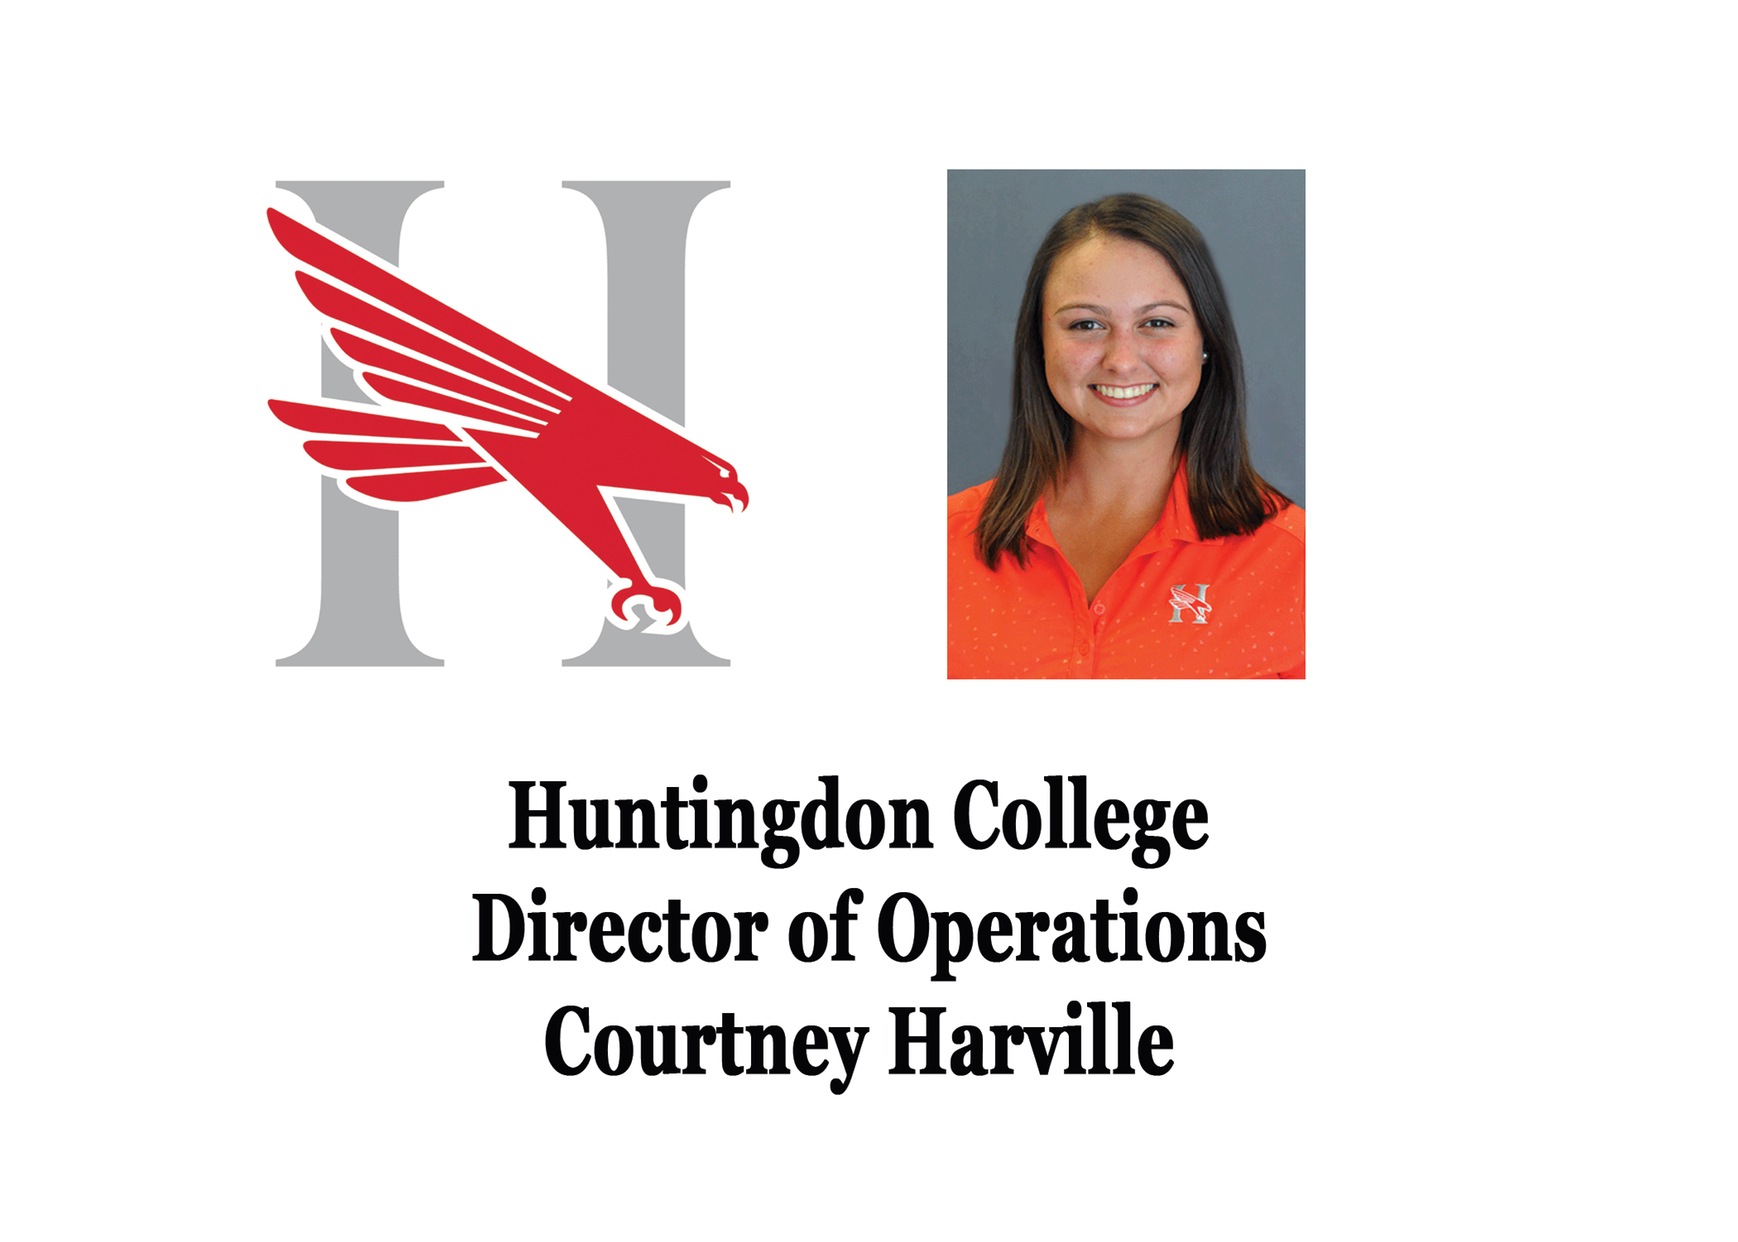 Harville hired as Director of Operations